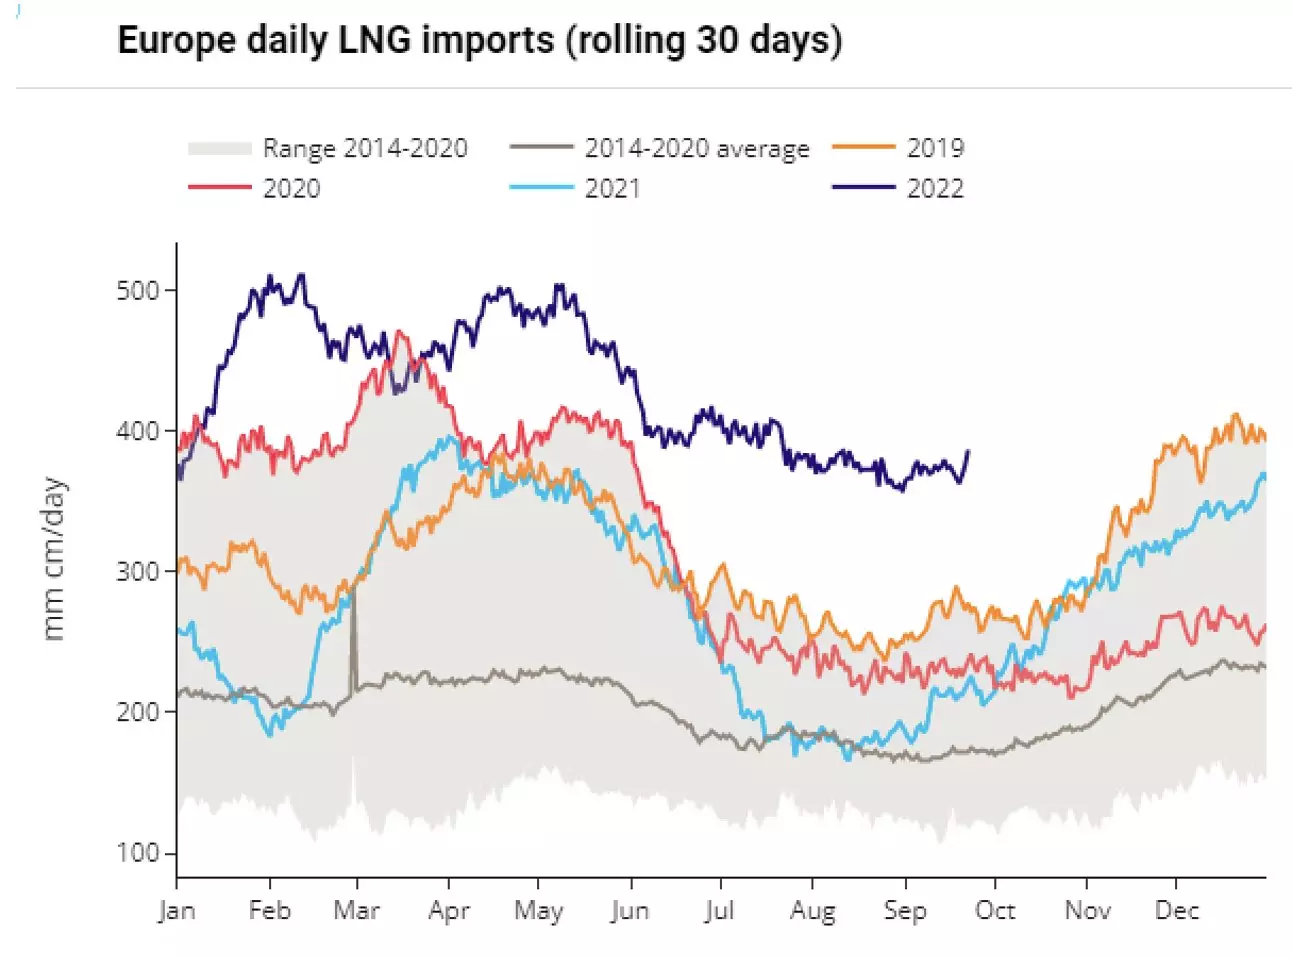 Europe daily LNG imports chart